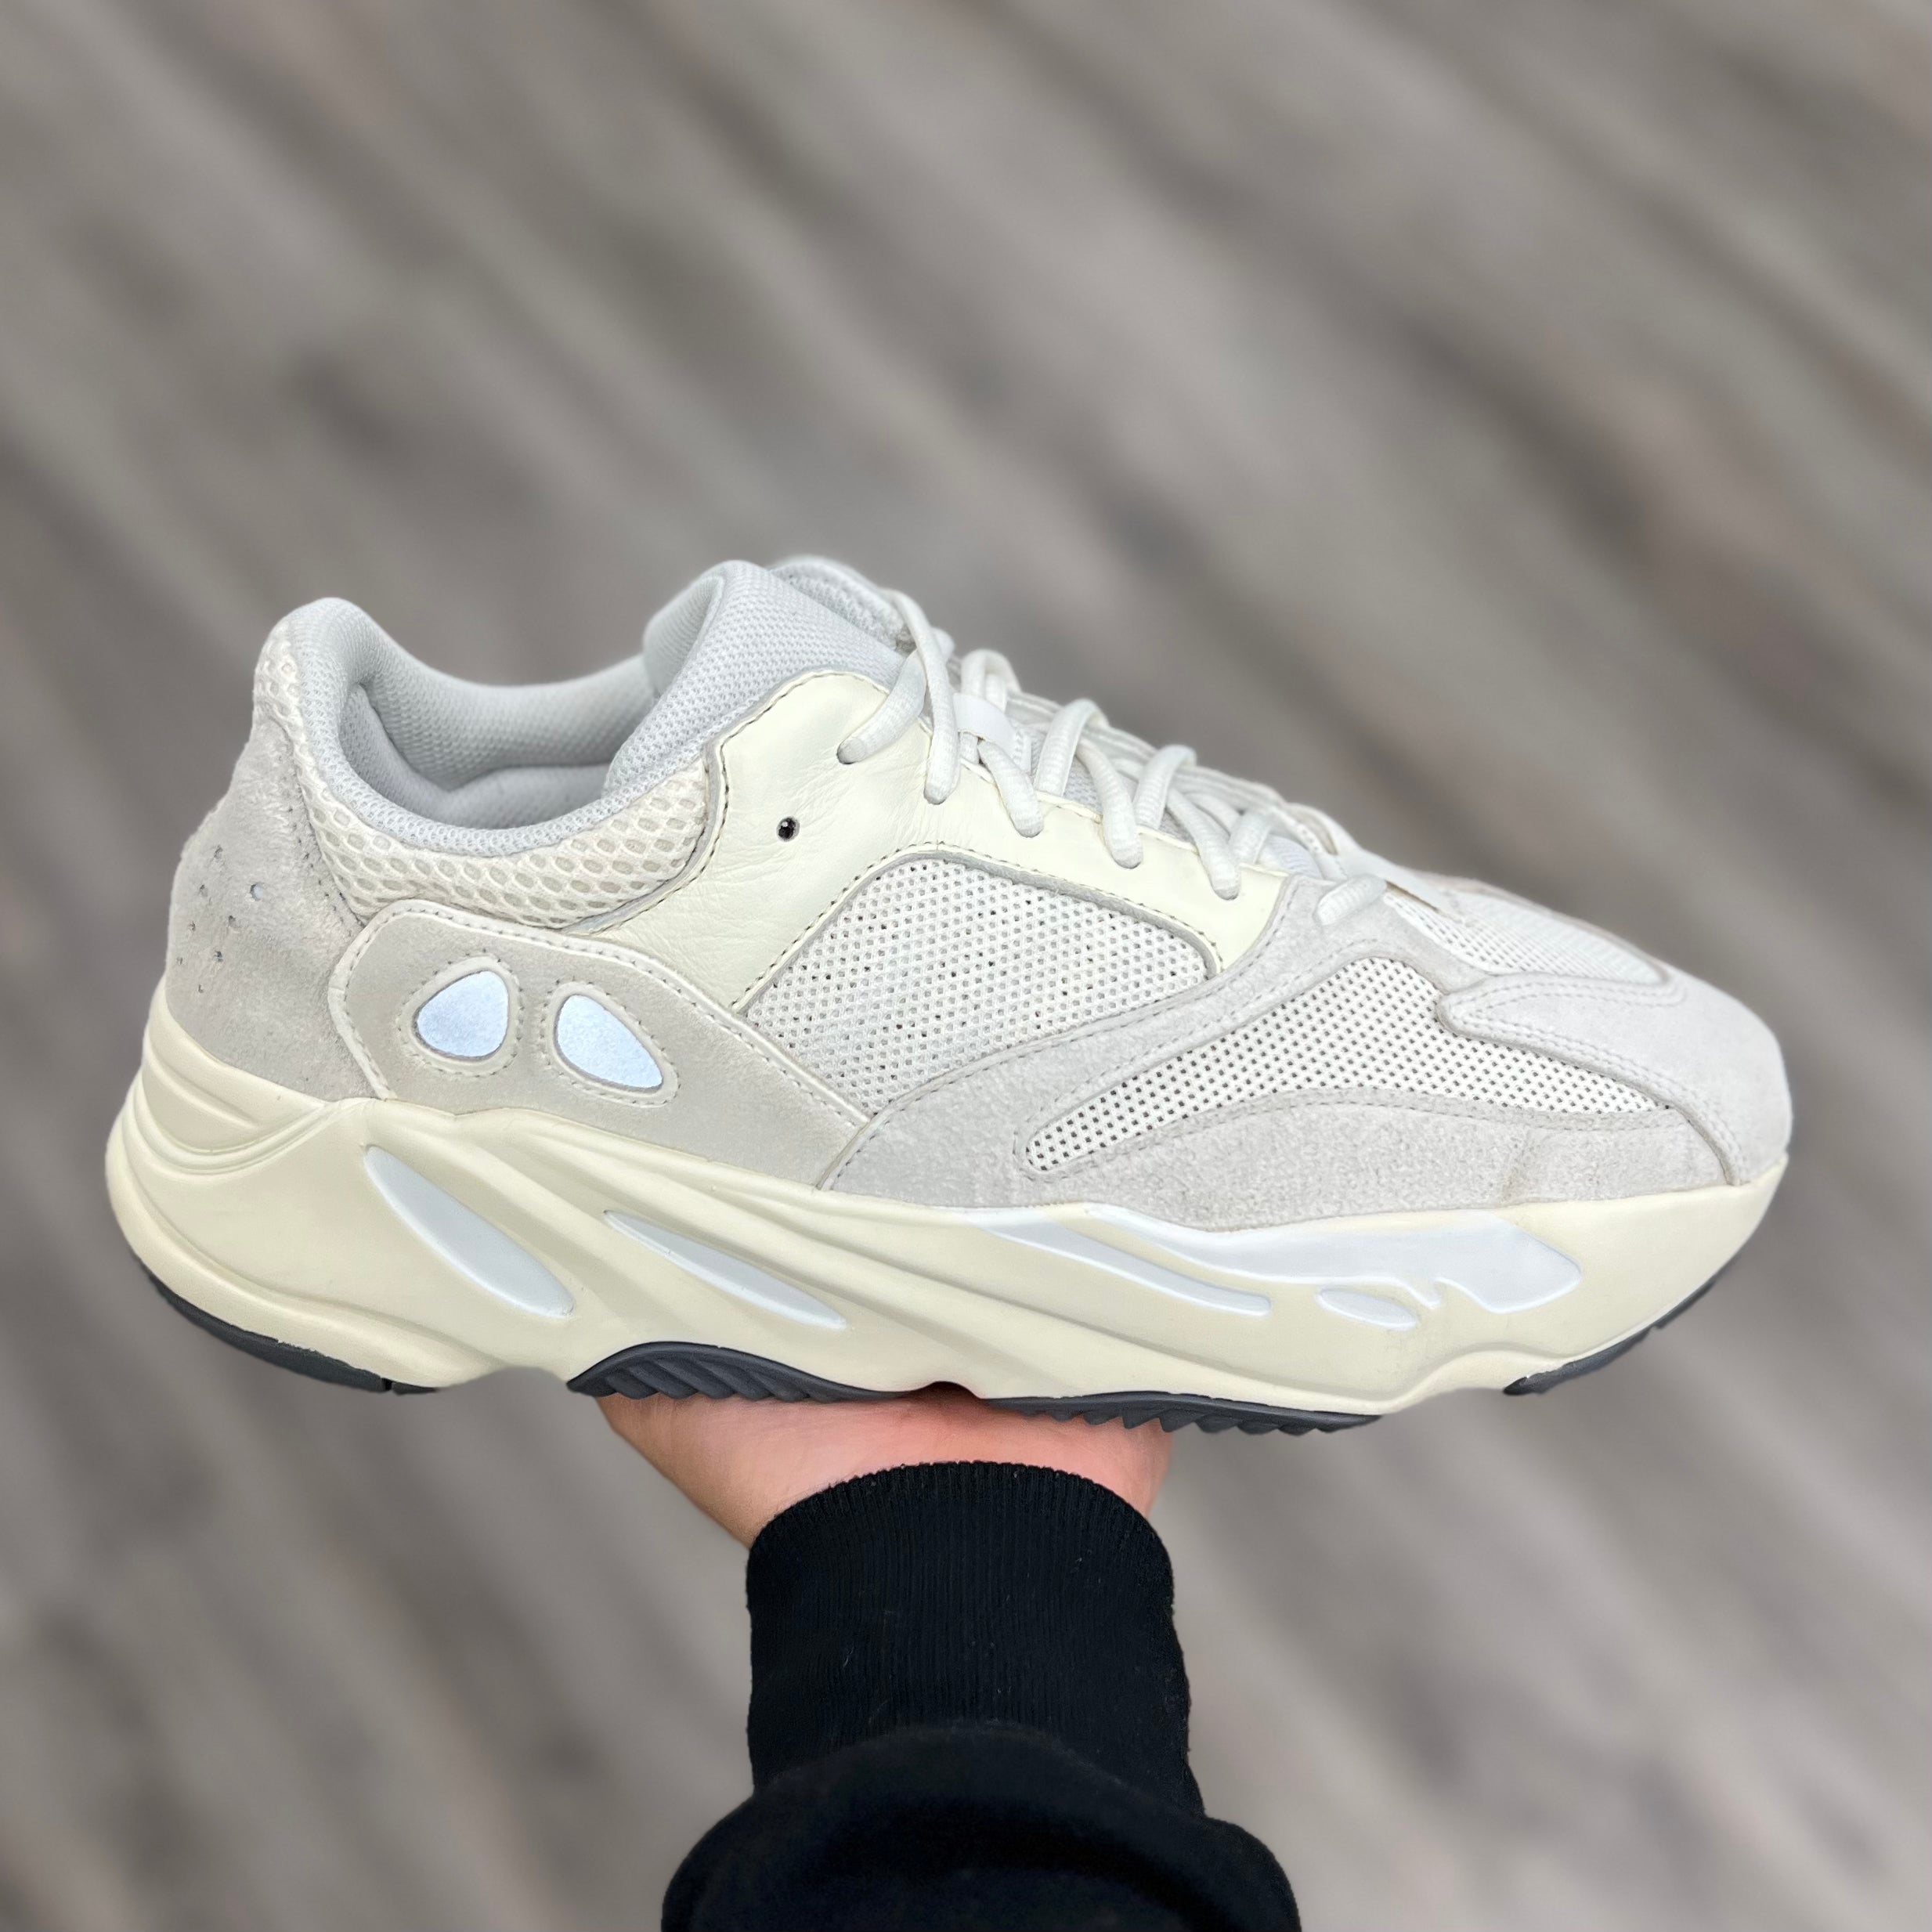 Adidas Yeezy Boost 700 “Analog” | Request